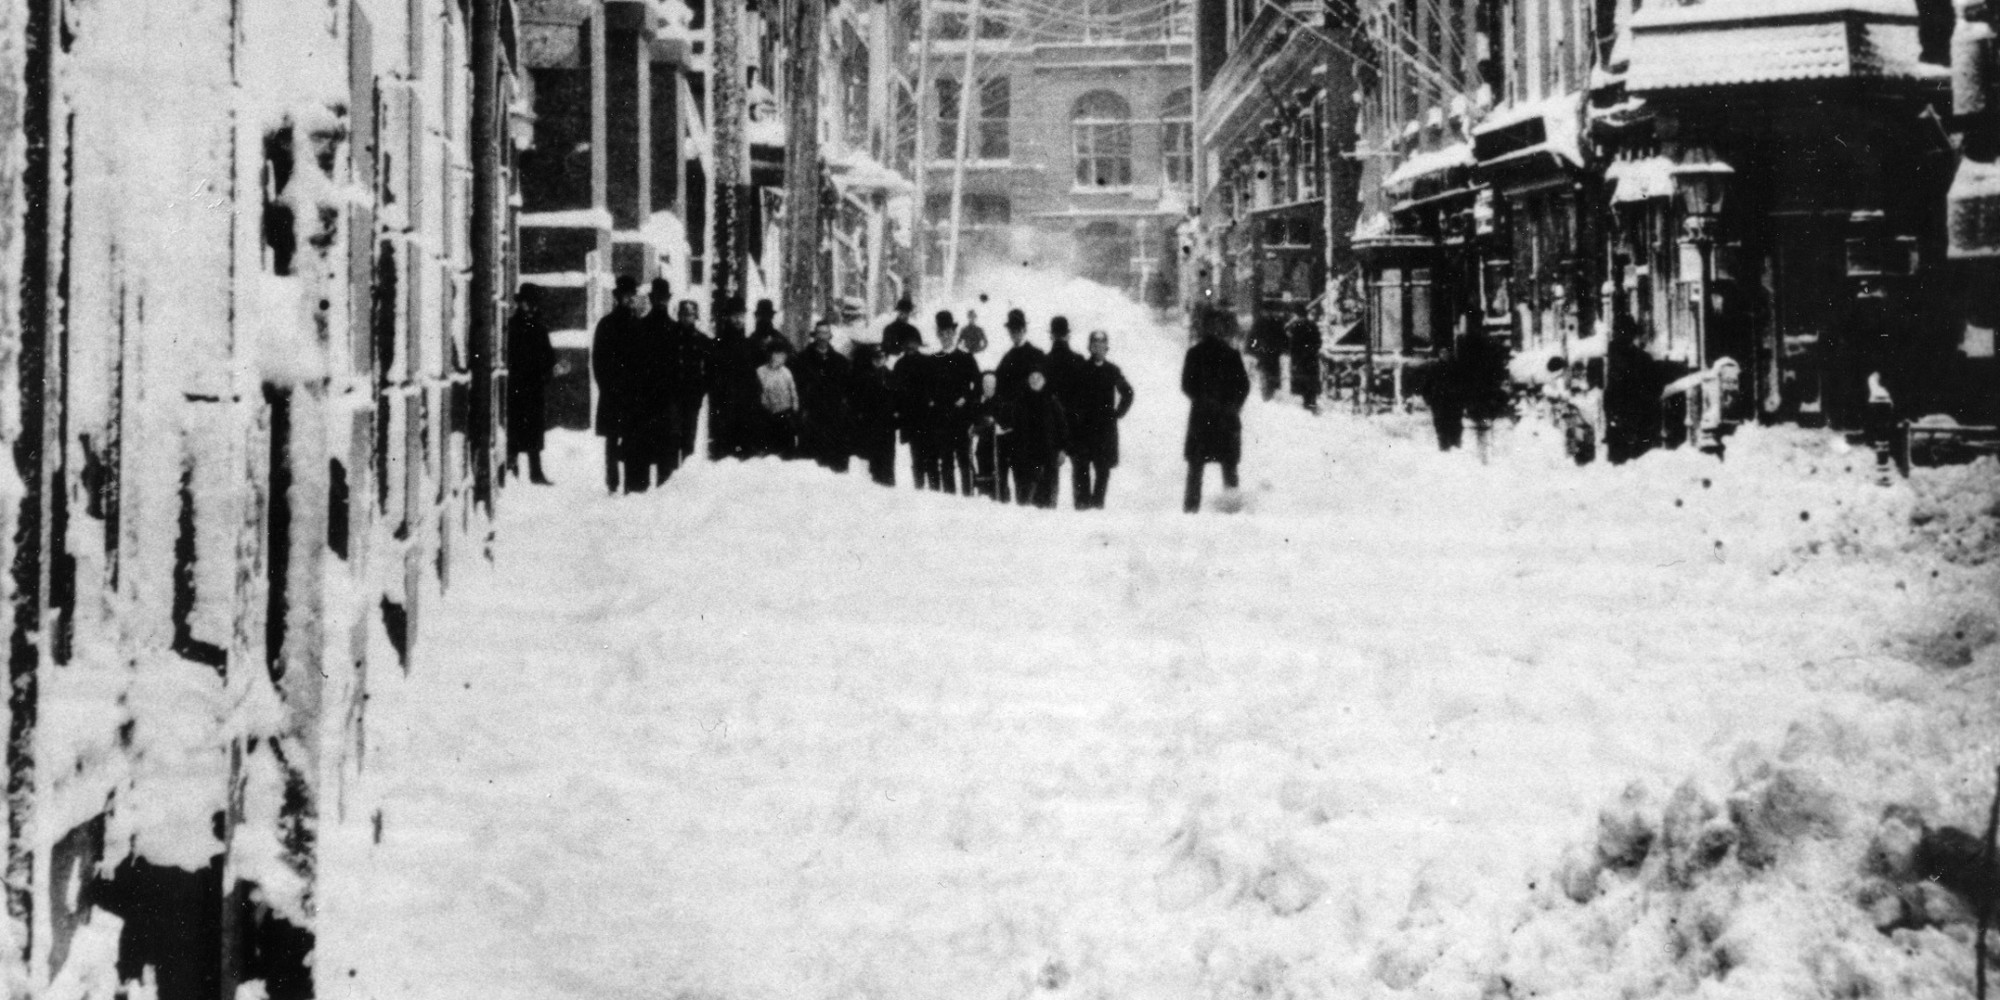 This Is What New York City Of The Past Looked Like Blanketed In Snow